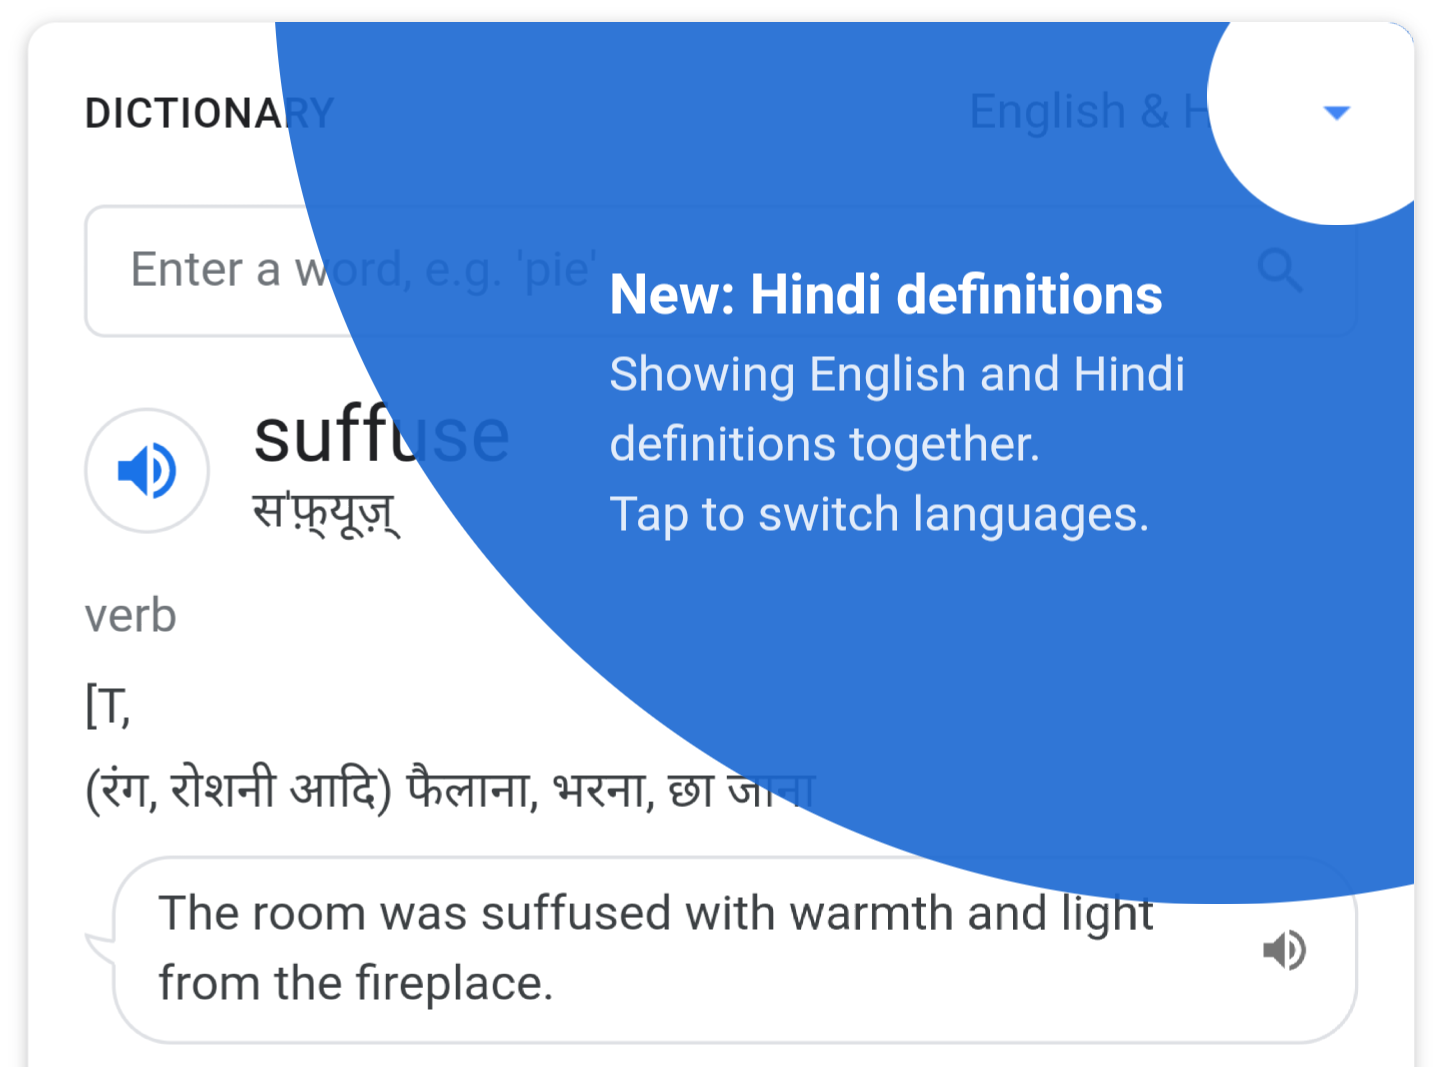 Google Search In India Starts Showing Dictionary Definitions In Both English And Hindi